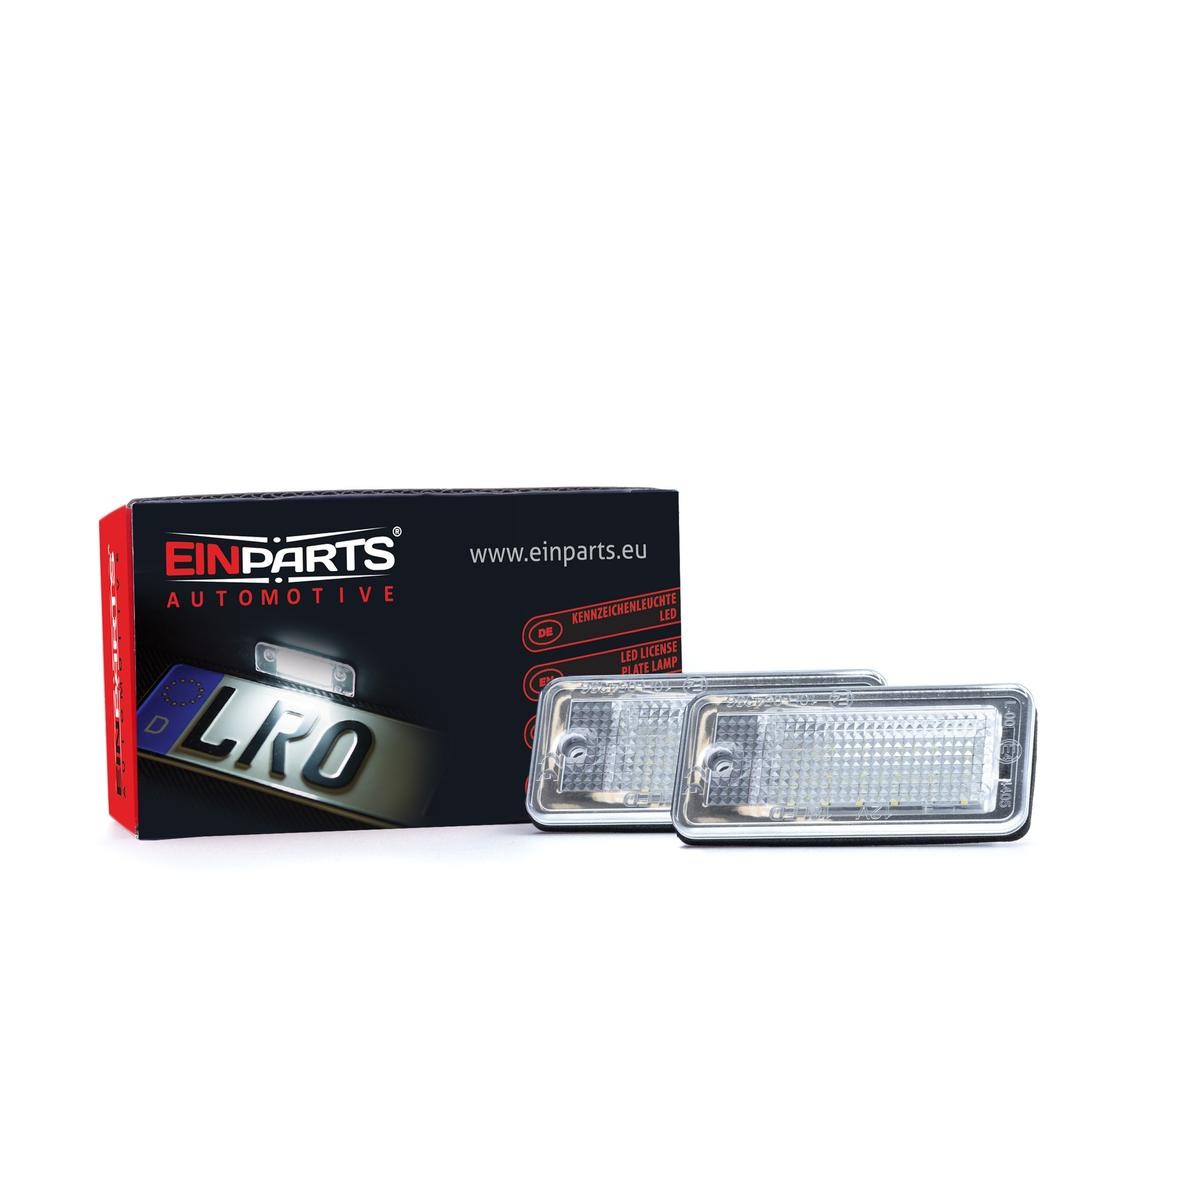 EINPARTS EP18 Number plate light Audi A1 8x 1.4 TFSI 140 hp Petrol 2012 price